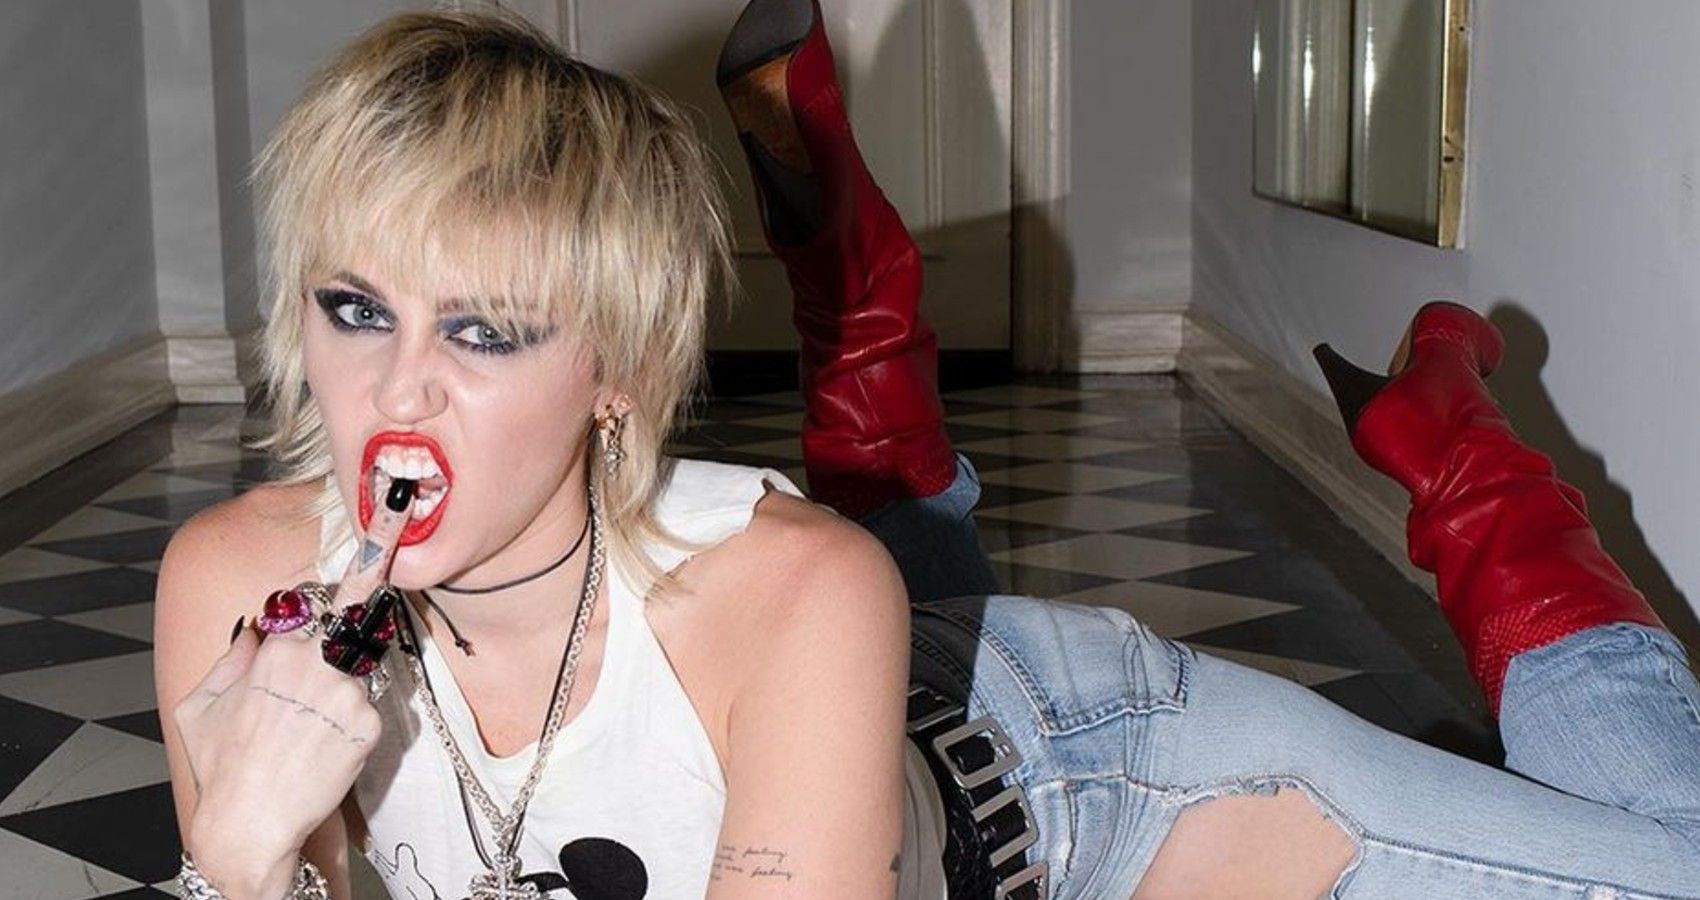 Miley Cyrus Shared Mom Dad Reaction To Leaked Private Photos